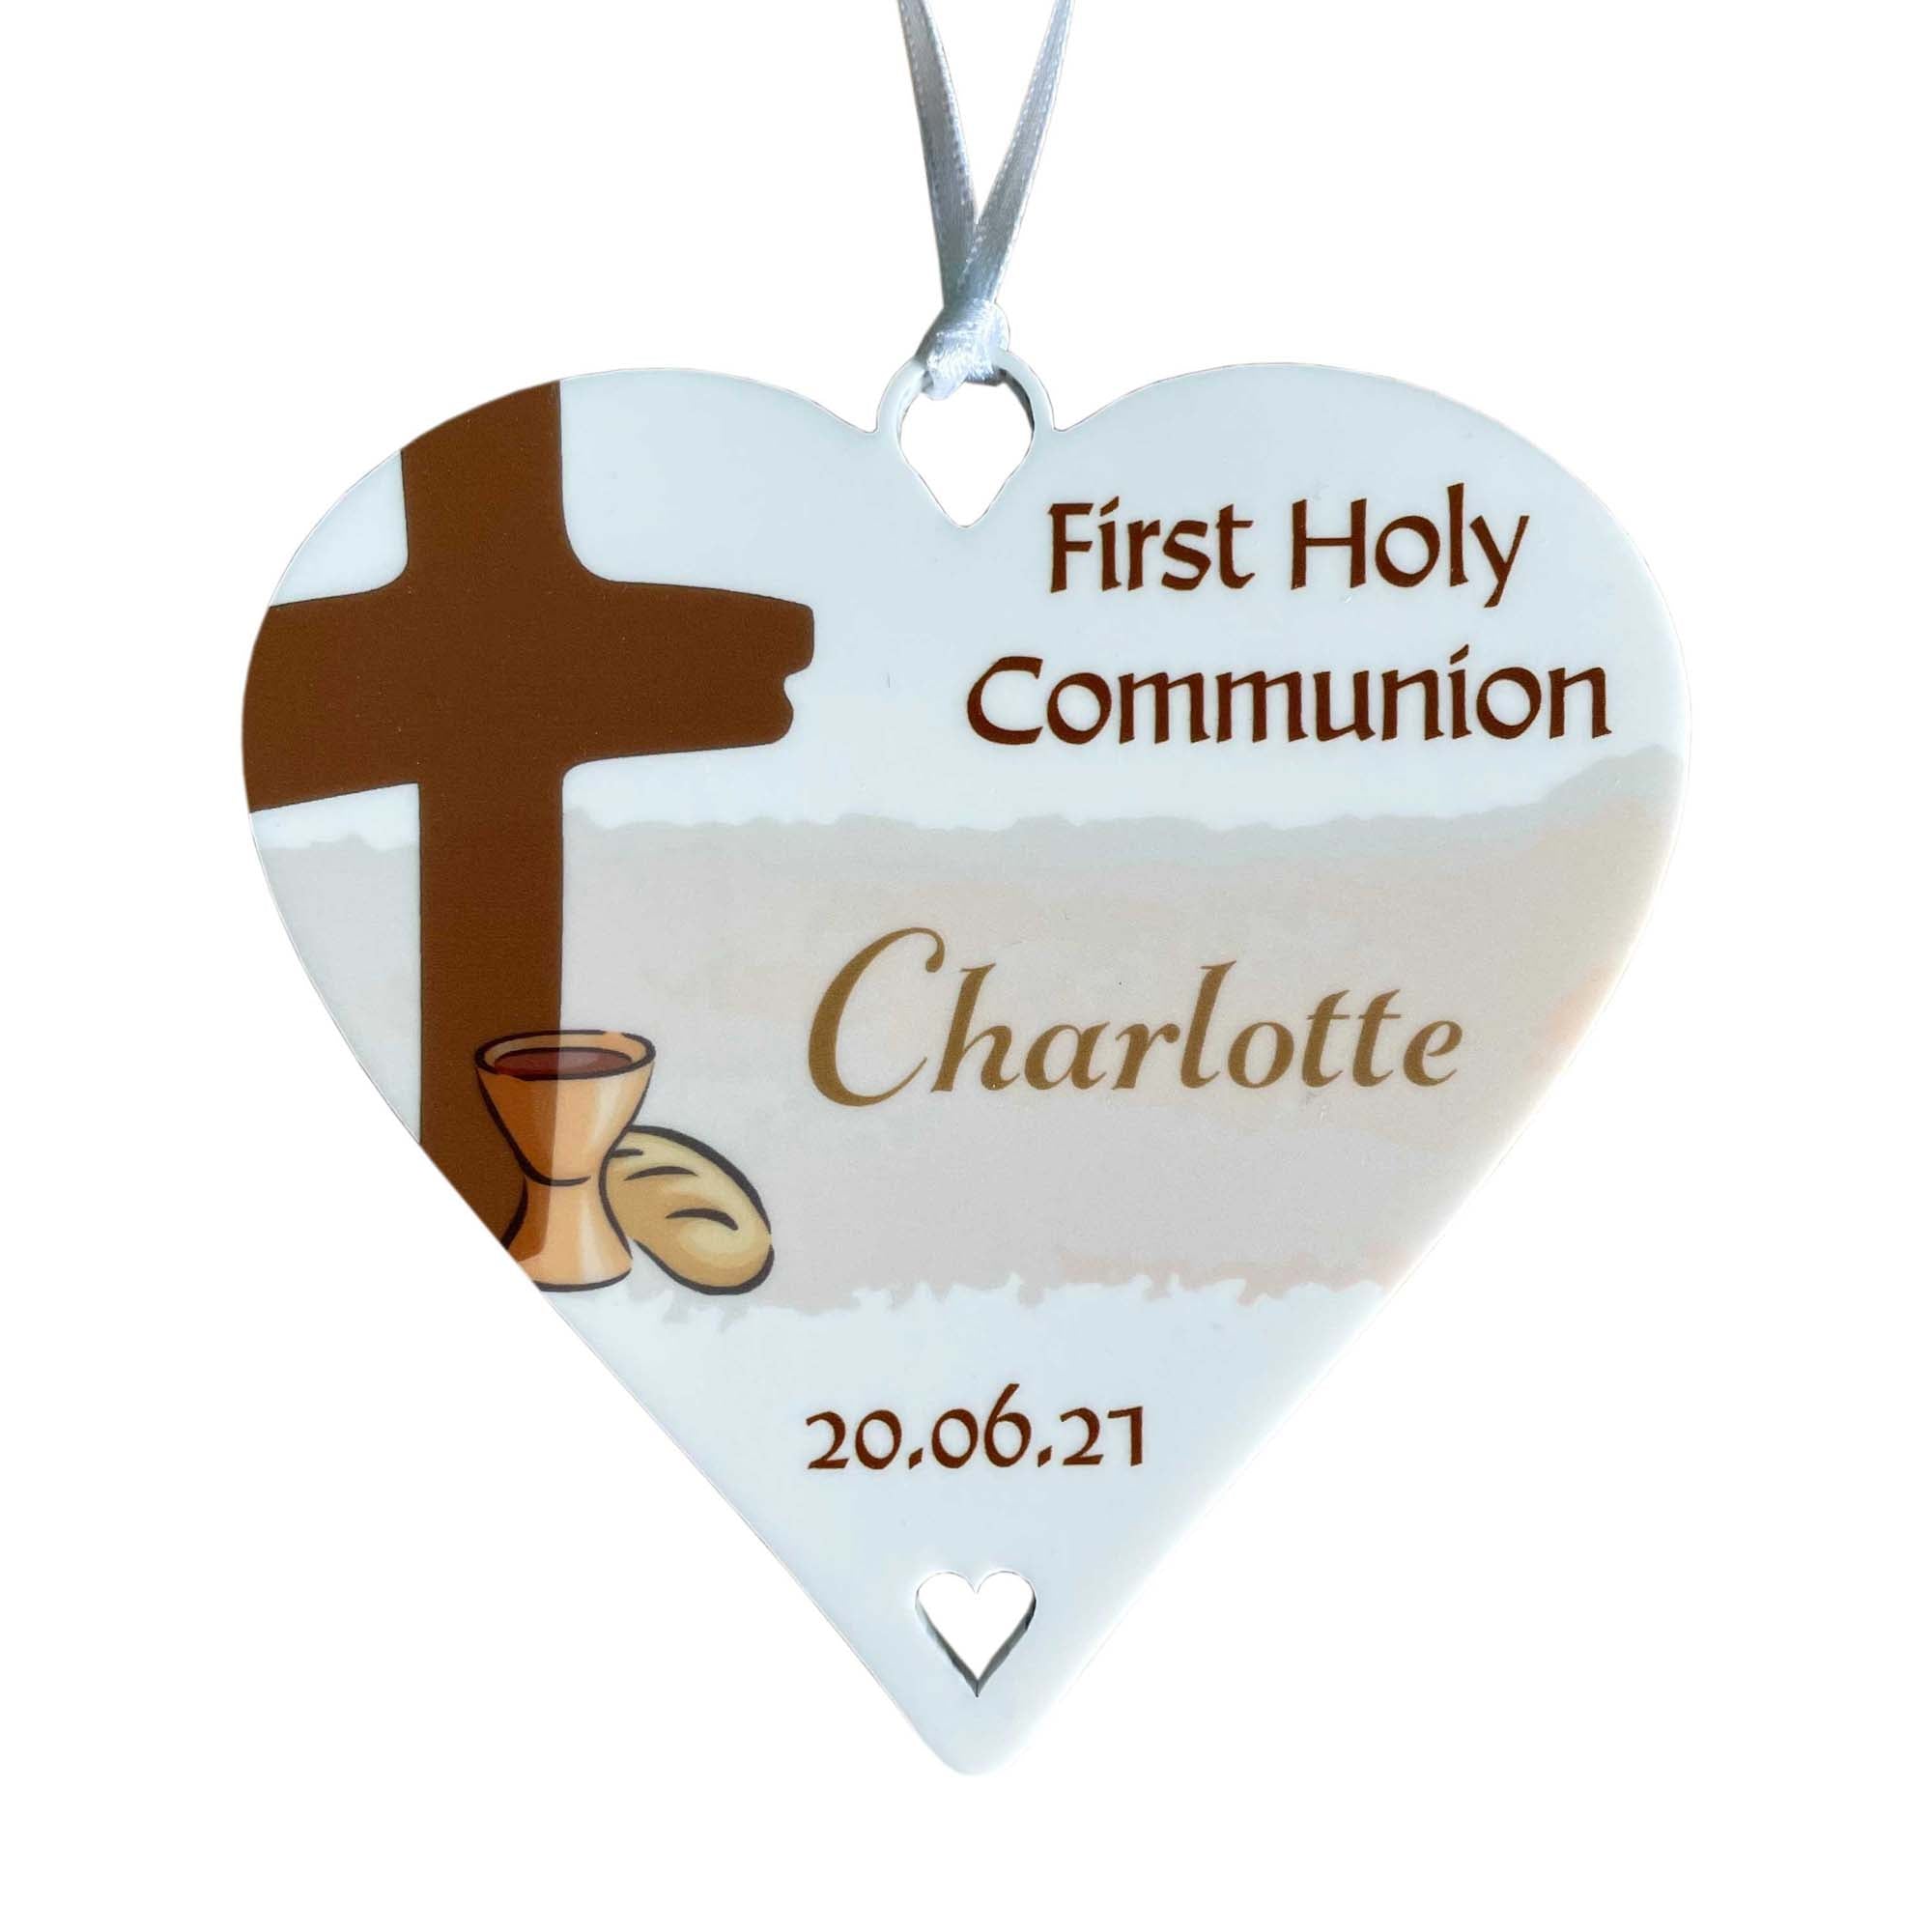 First Holy Communion Personalised Gift for Girls / Boys Congratulations On your 1st Holy Communion - 10cm Heart